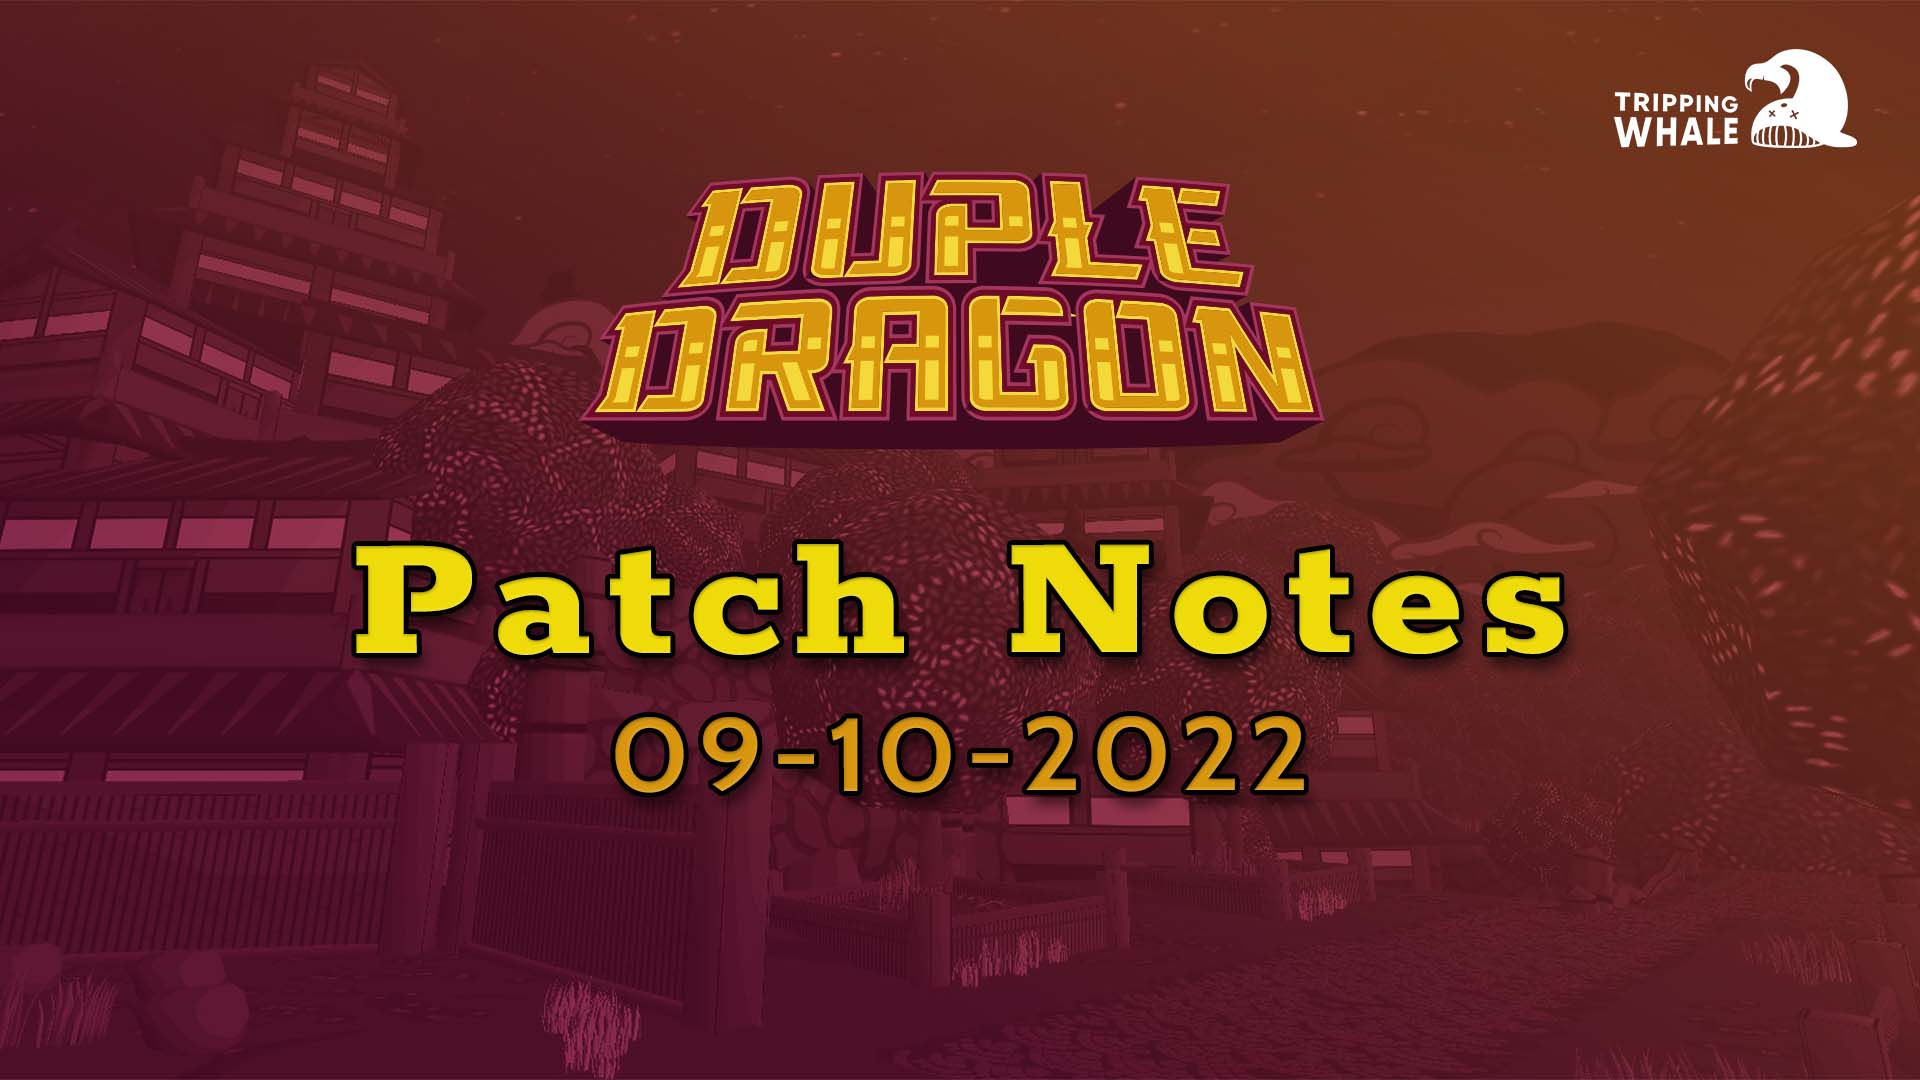 Duple Dragon Patch Notes – 09-10-2022